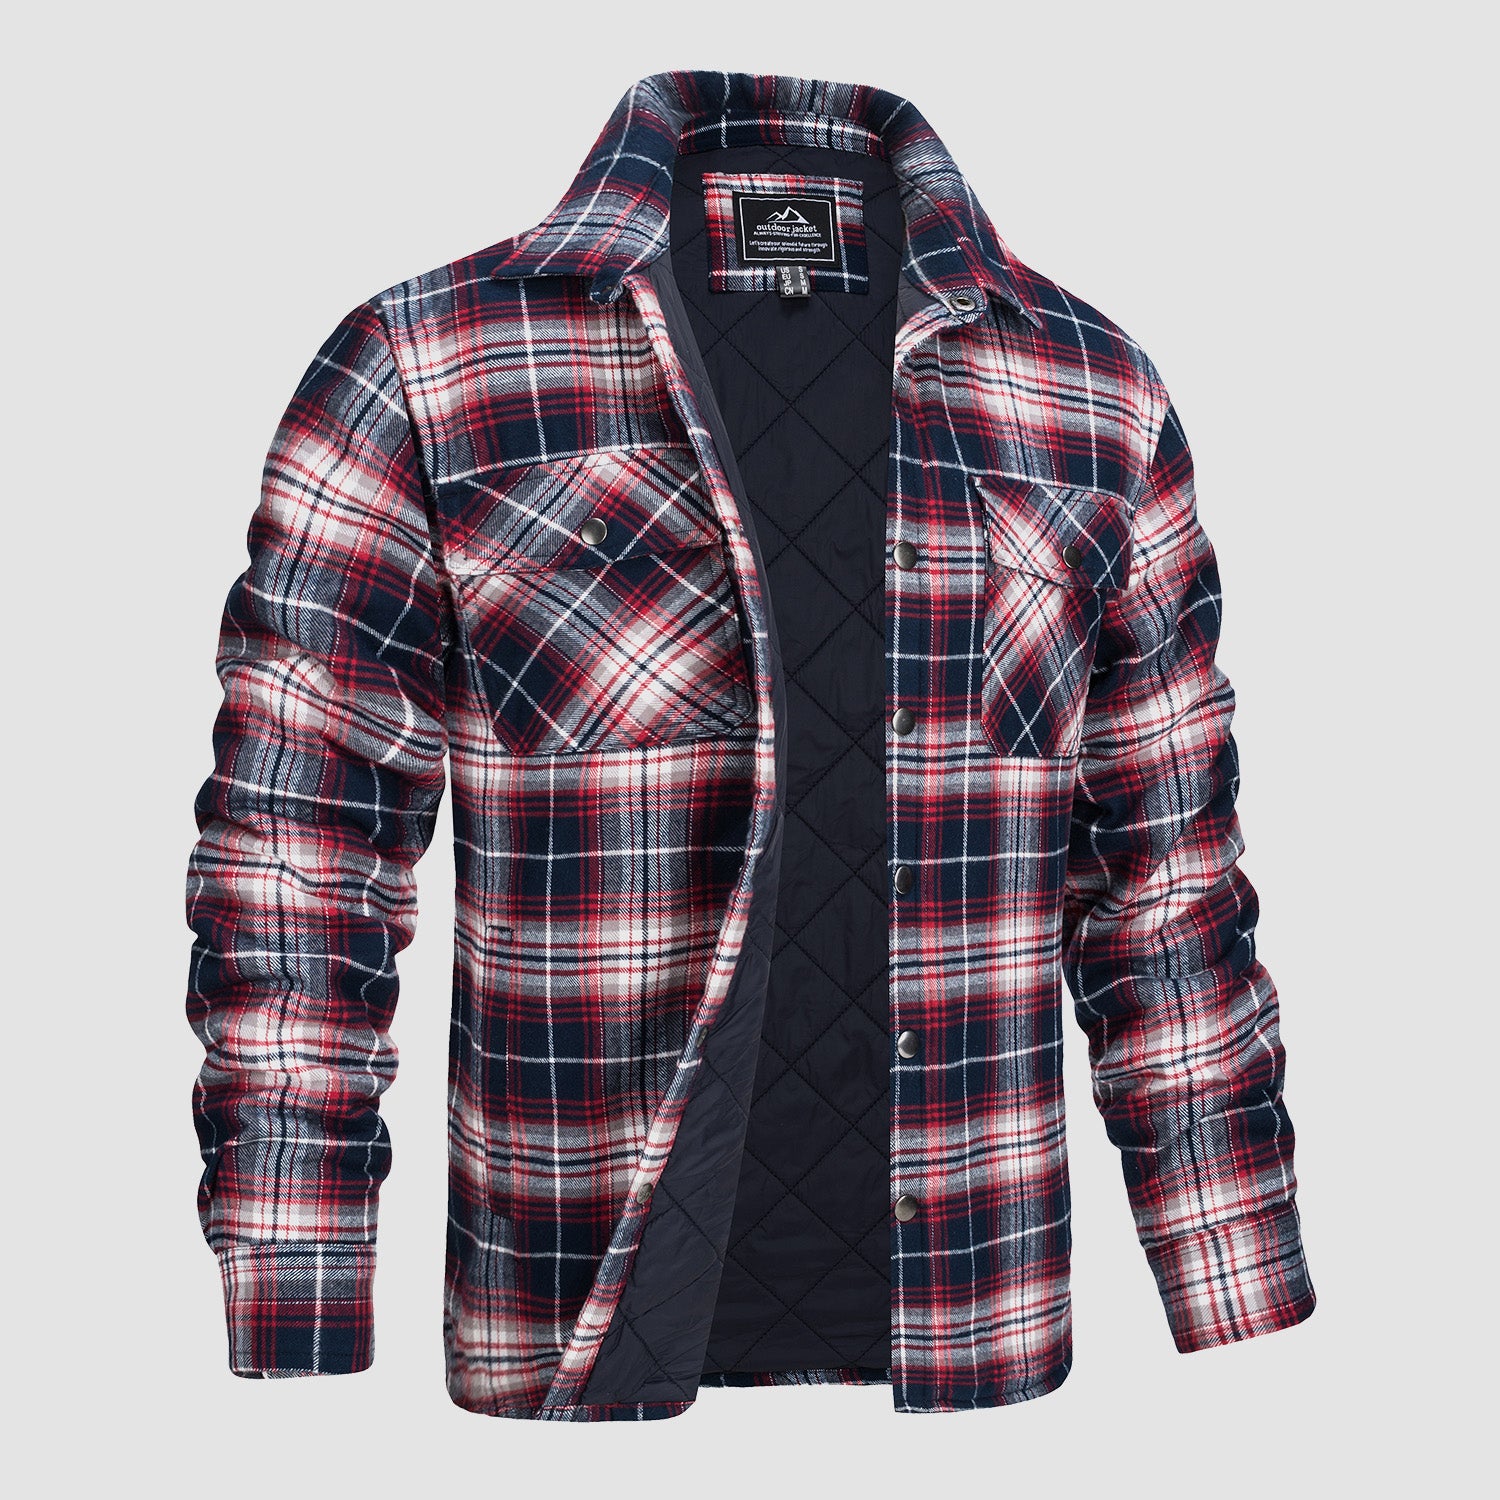 Men's Lined Hooded Flannel Shirt Jacket Quilted Plaid Coat Button Down Plaid  Button Up Winter Jackets 